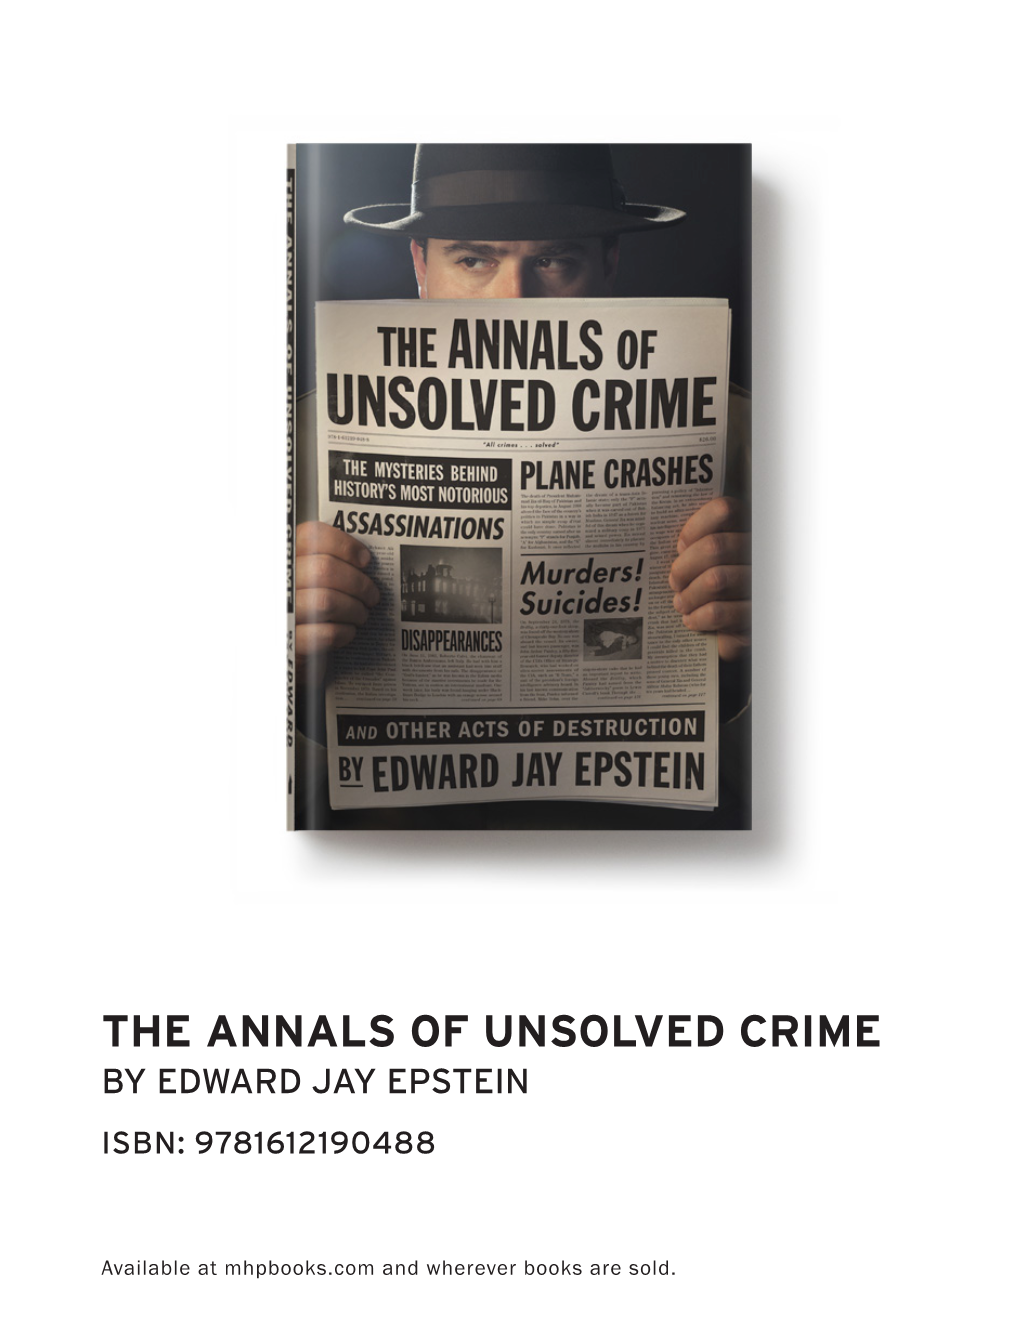 The Annals of Unsolved Crime by Edward Jay Epstein Isbn: 9781612190488